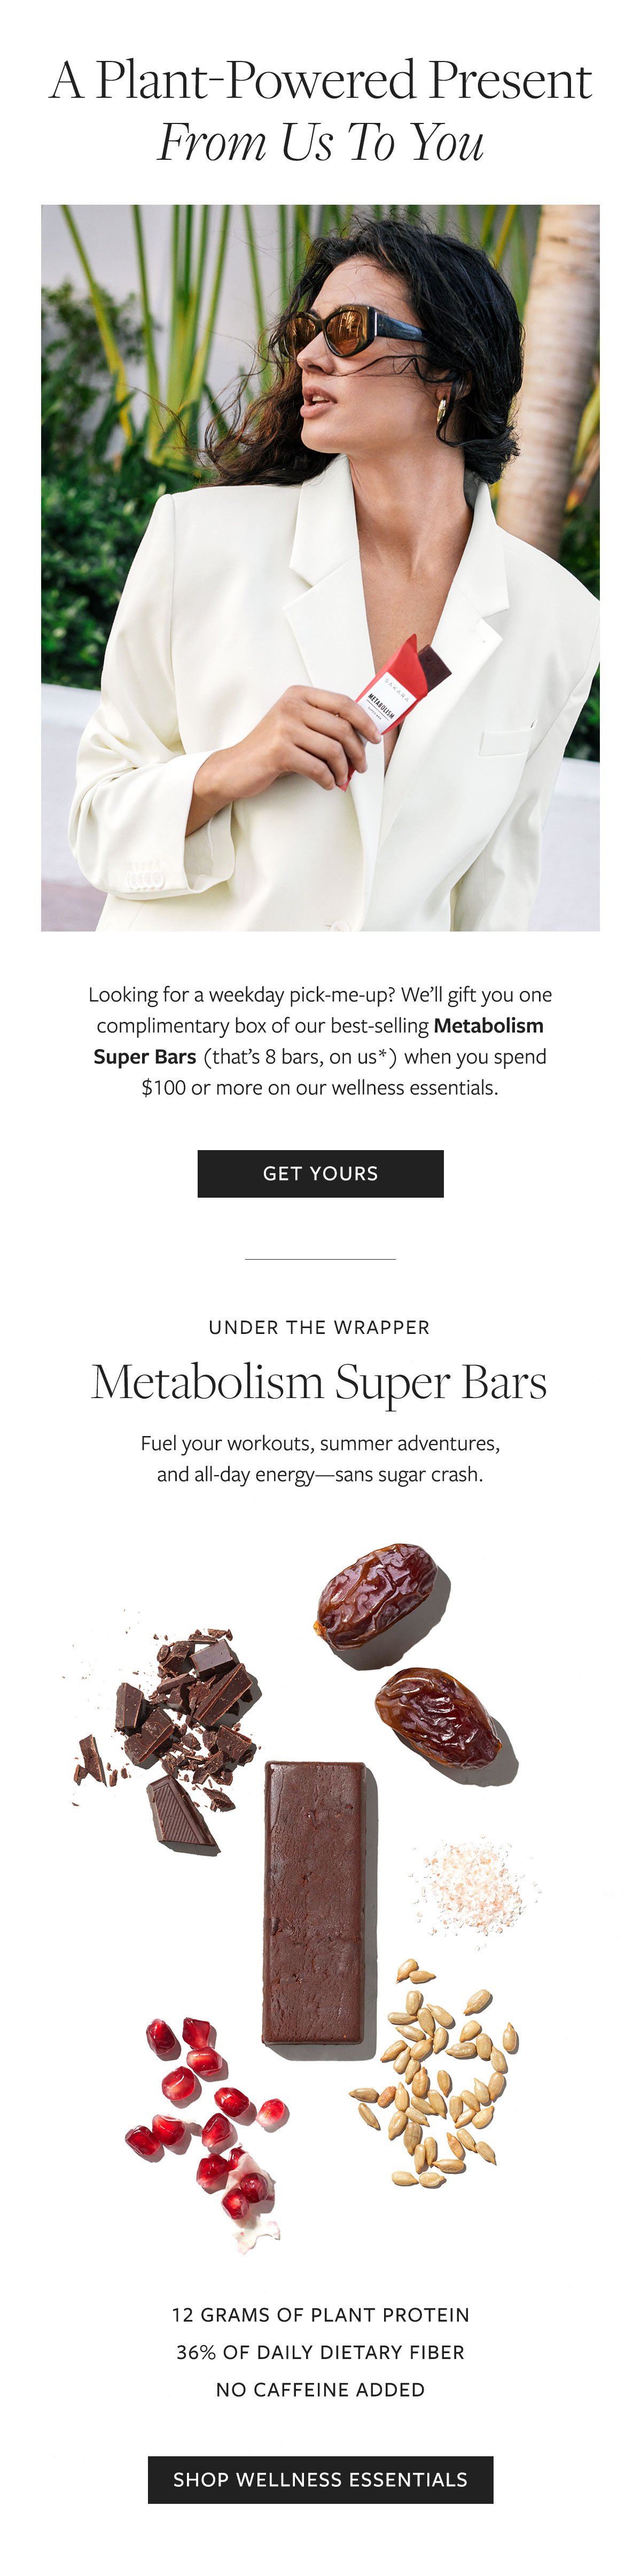 We're gifting one complimentary box of our best-selling Metabolism Super Bars when you spend $100 or more on our wellness essentials.